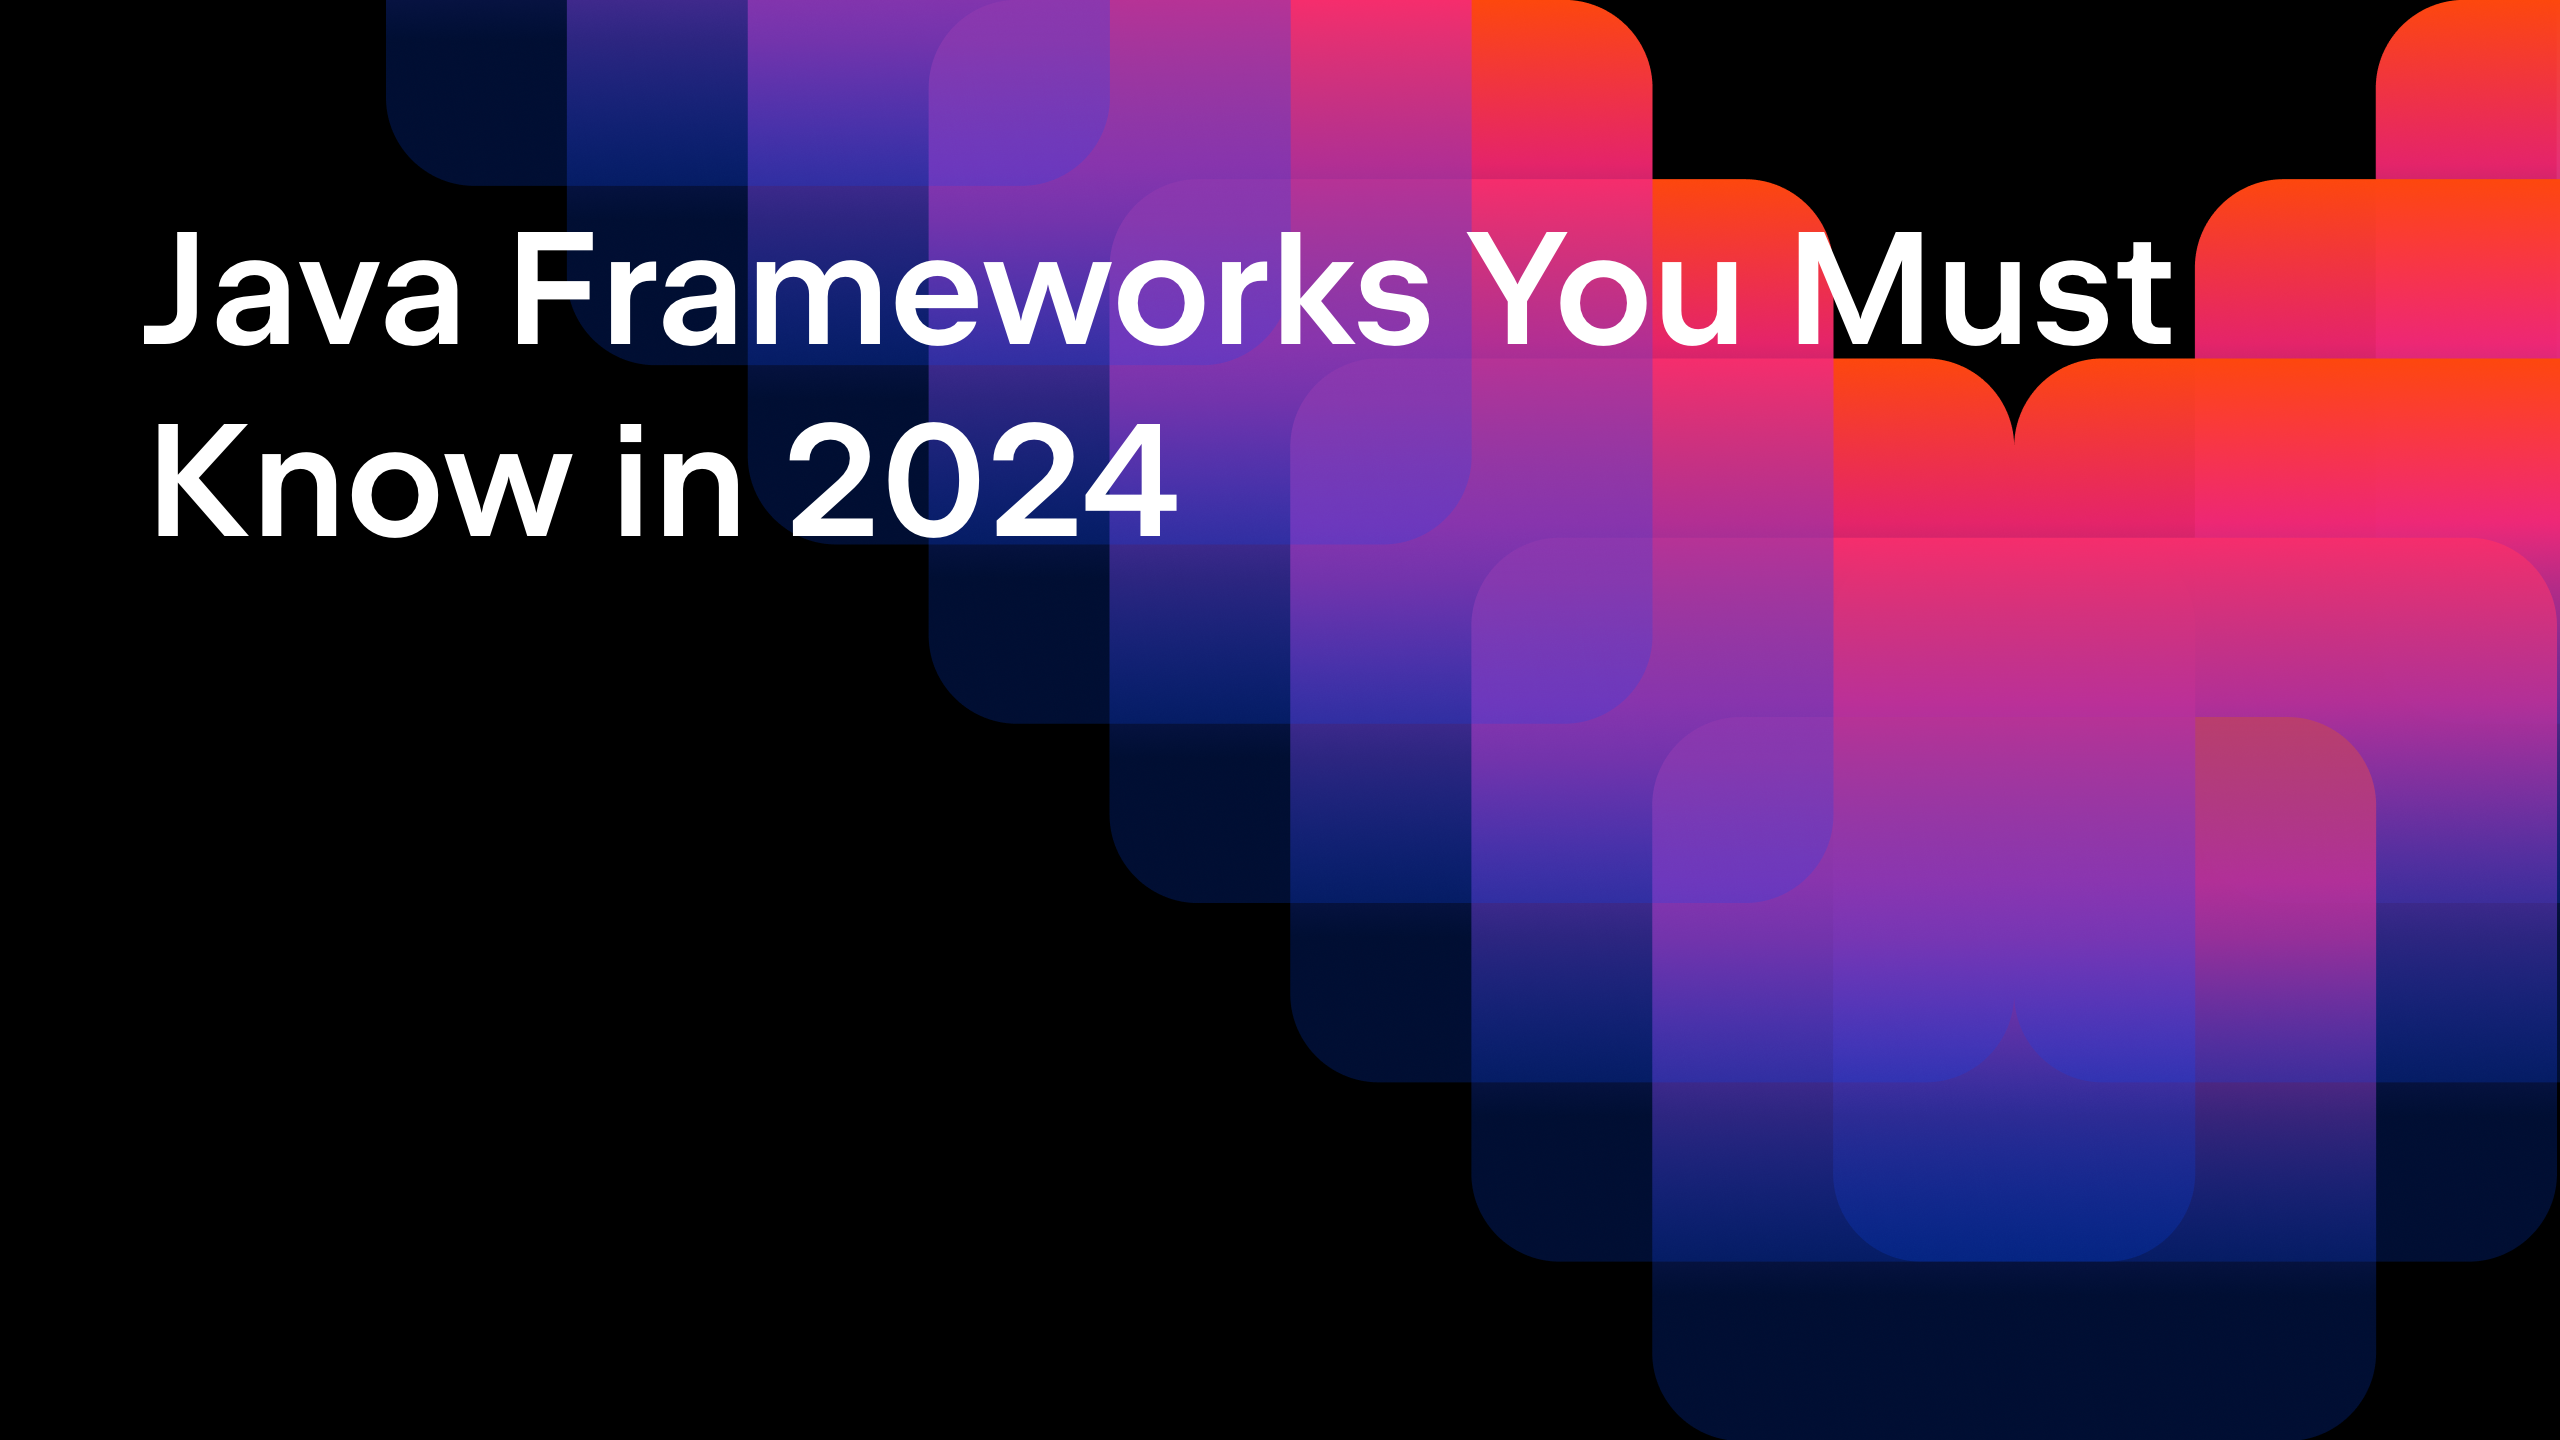 Java Frameworks You Must Know in 2024